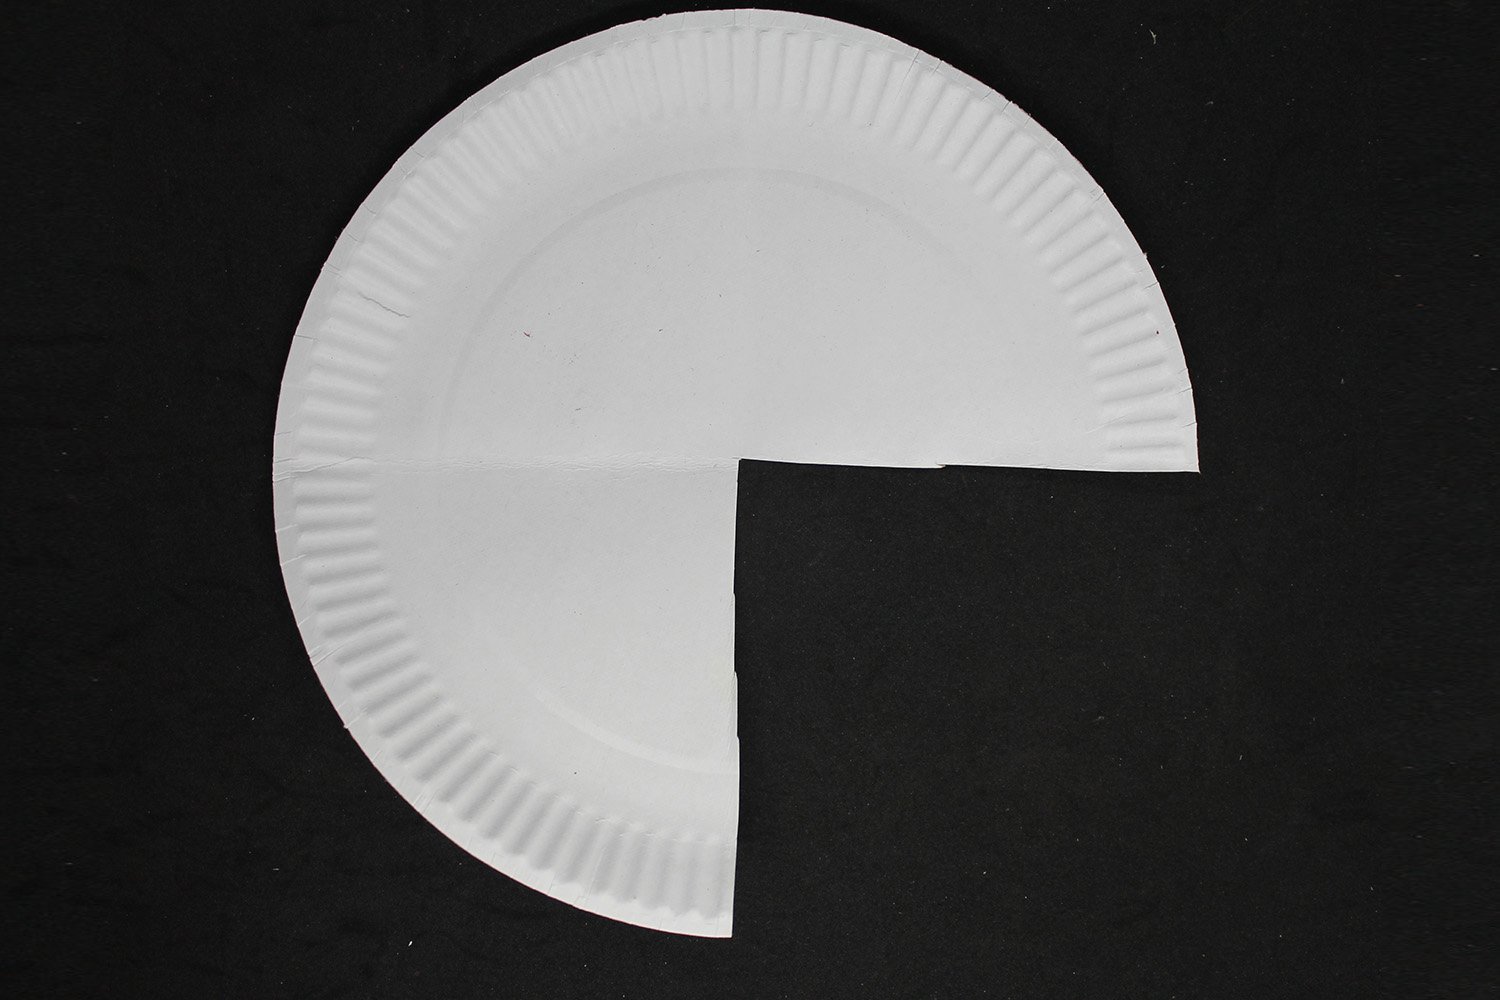 How to Make a Paper Plate Monster - Step 3